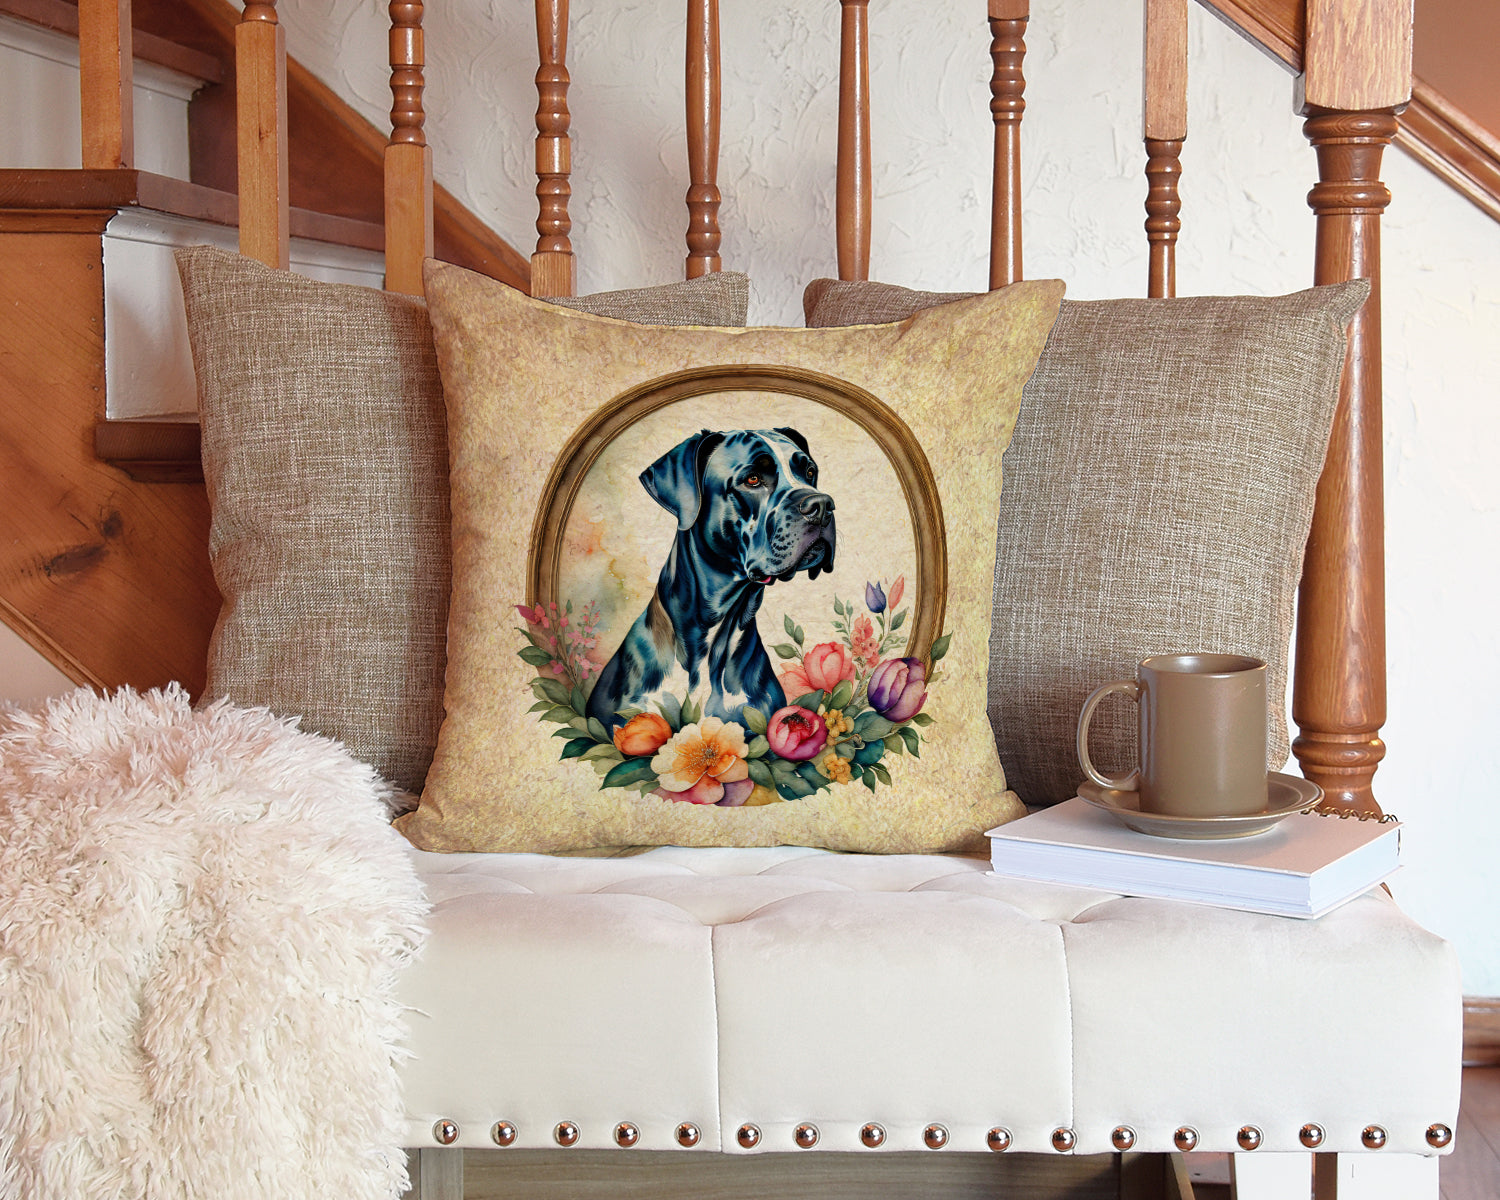 Great Dane and Flowers Fabric Decorative Pillow